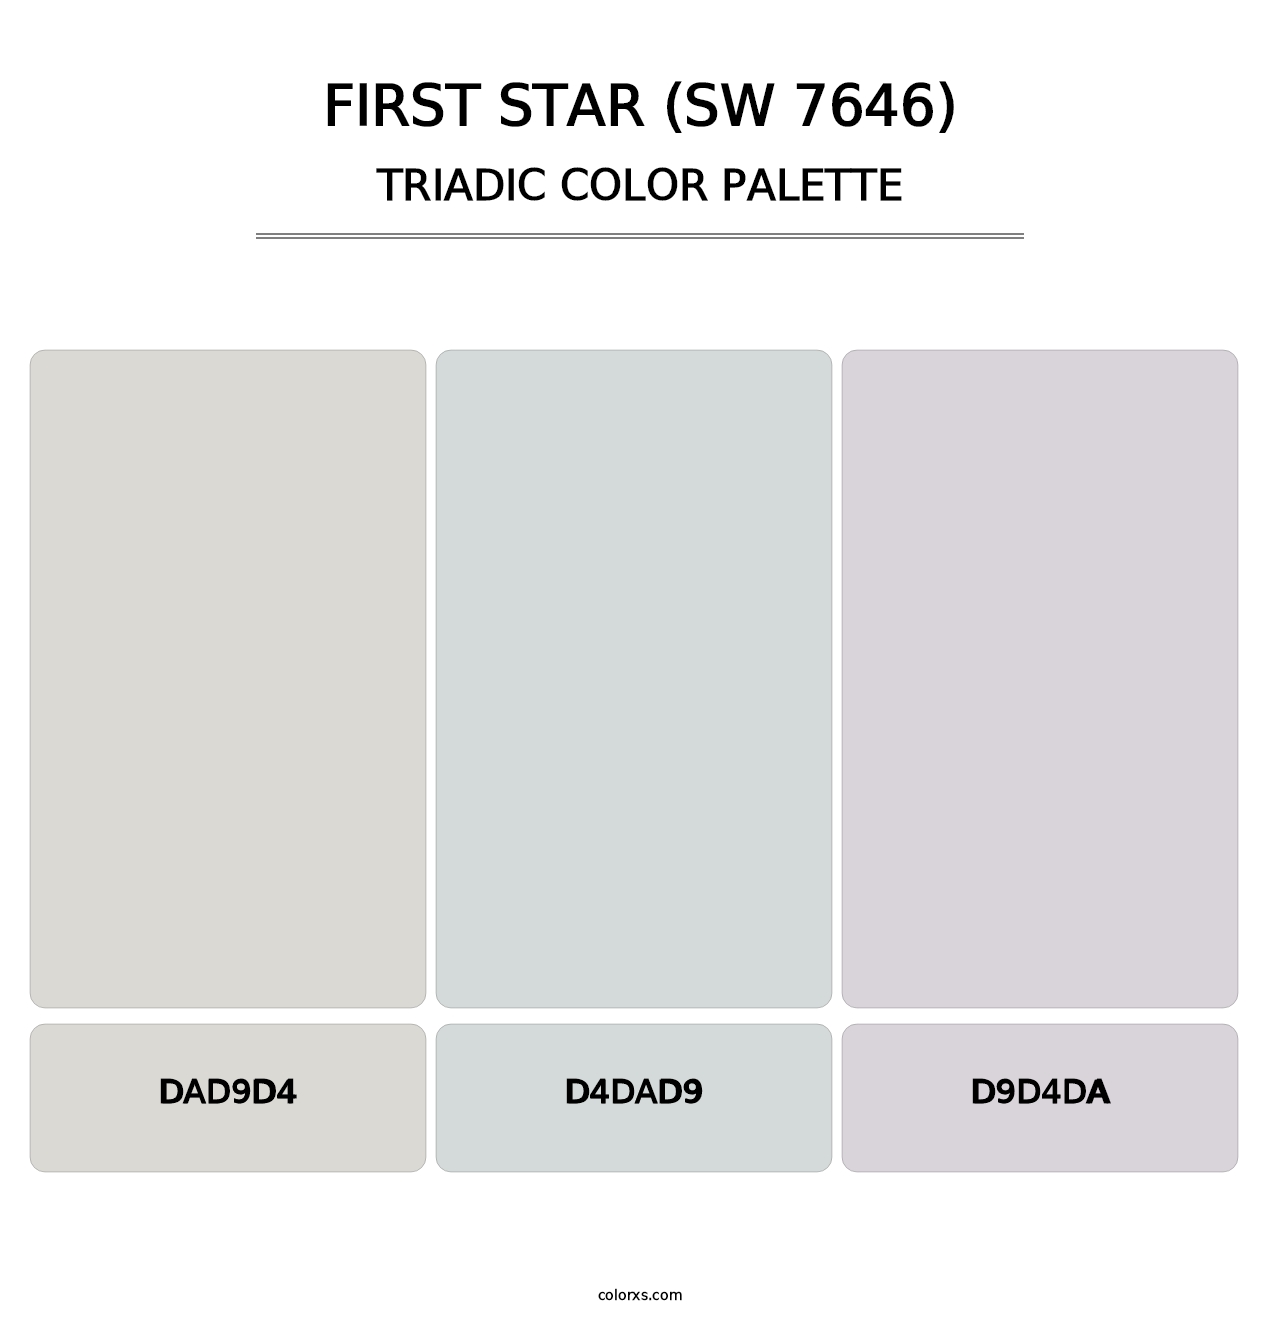 First Star (SW 7646) - Triadic Color Palette